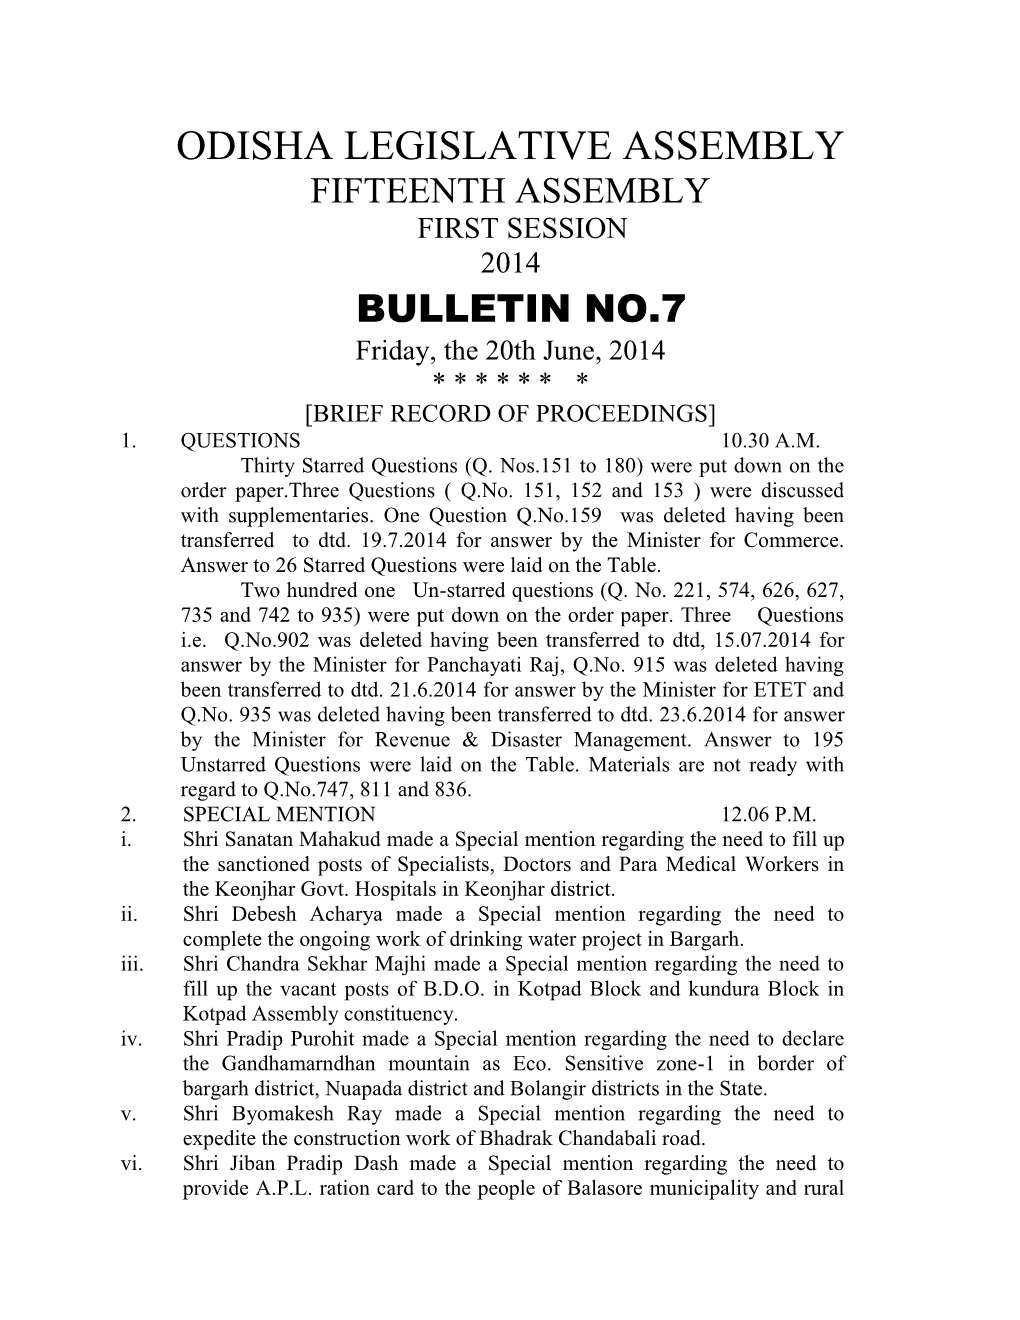 ODISHA LEGISLATIVE ASSEMBLY FIFTEENTH ASSEMBLY FIRST SESSION 2014 BULLETIN NO.7 Friday, the 20Th June, 2014 * * * * * * * [BRIEF RECORD of PROCEEDINGS] 1